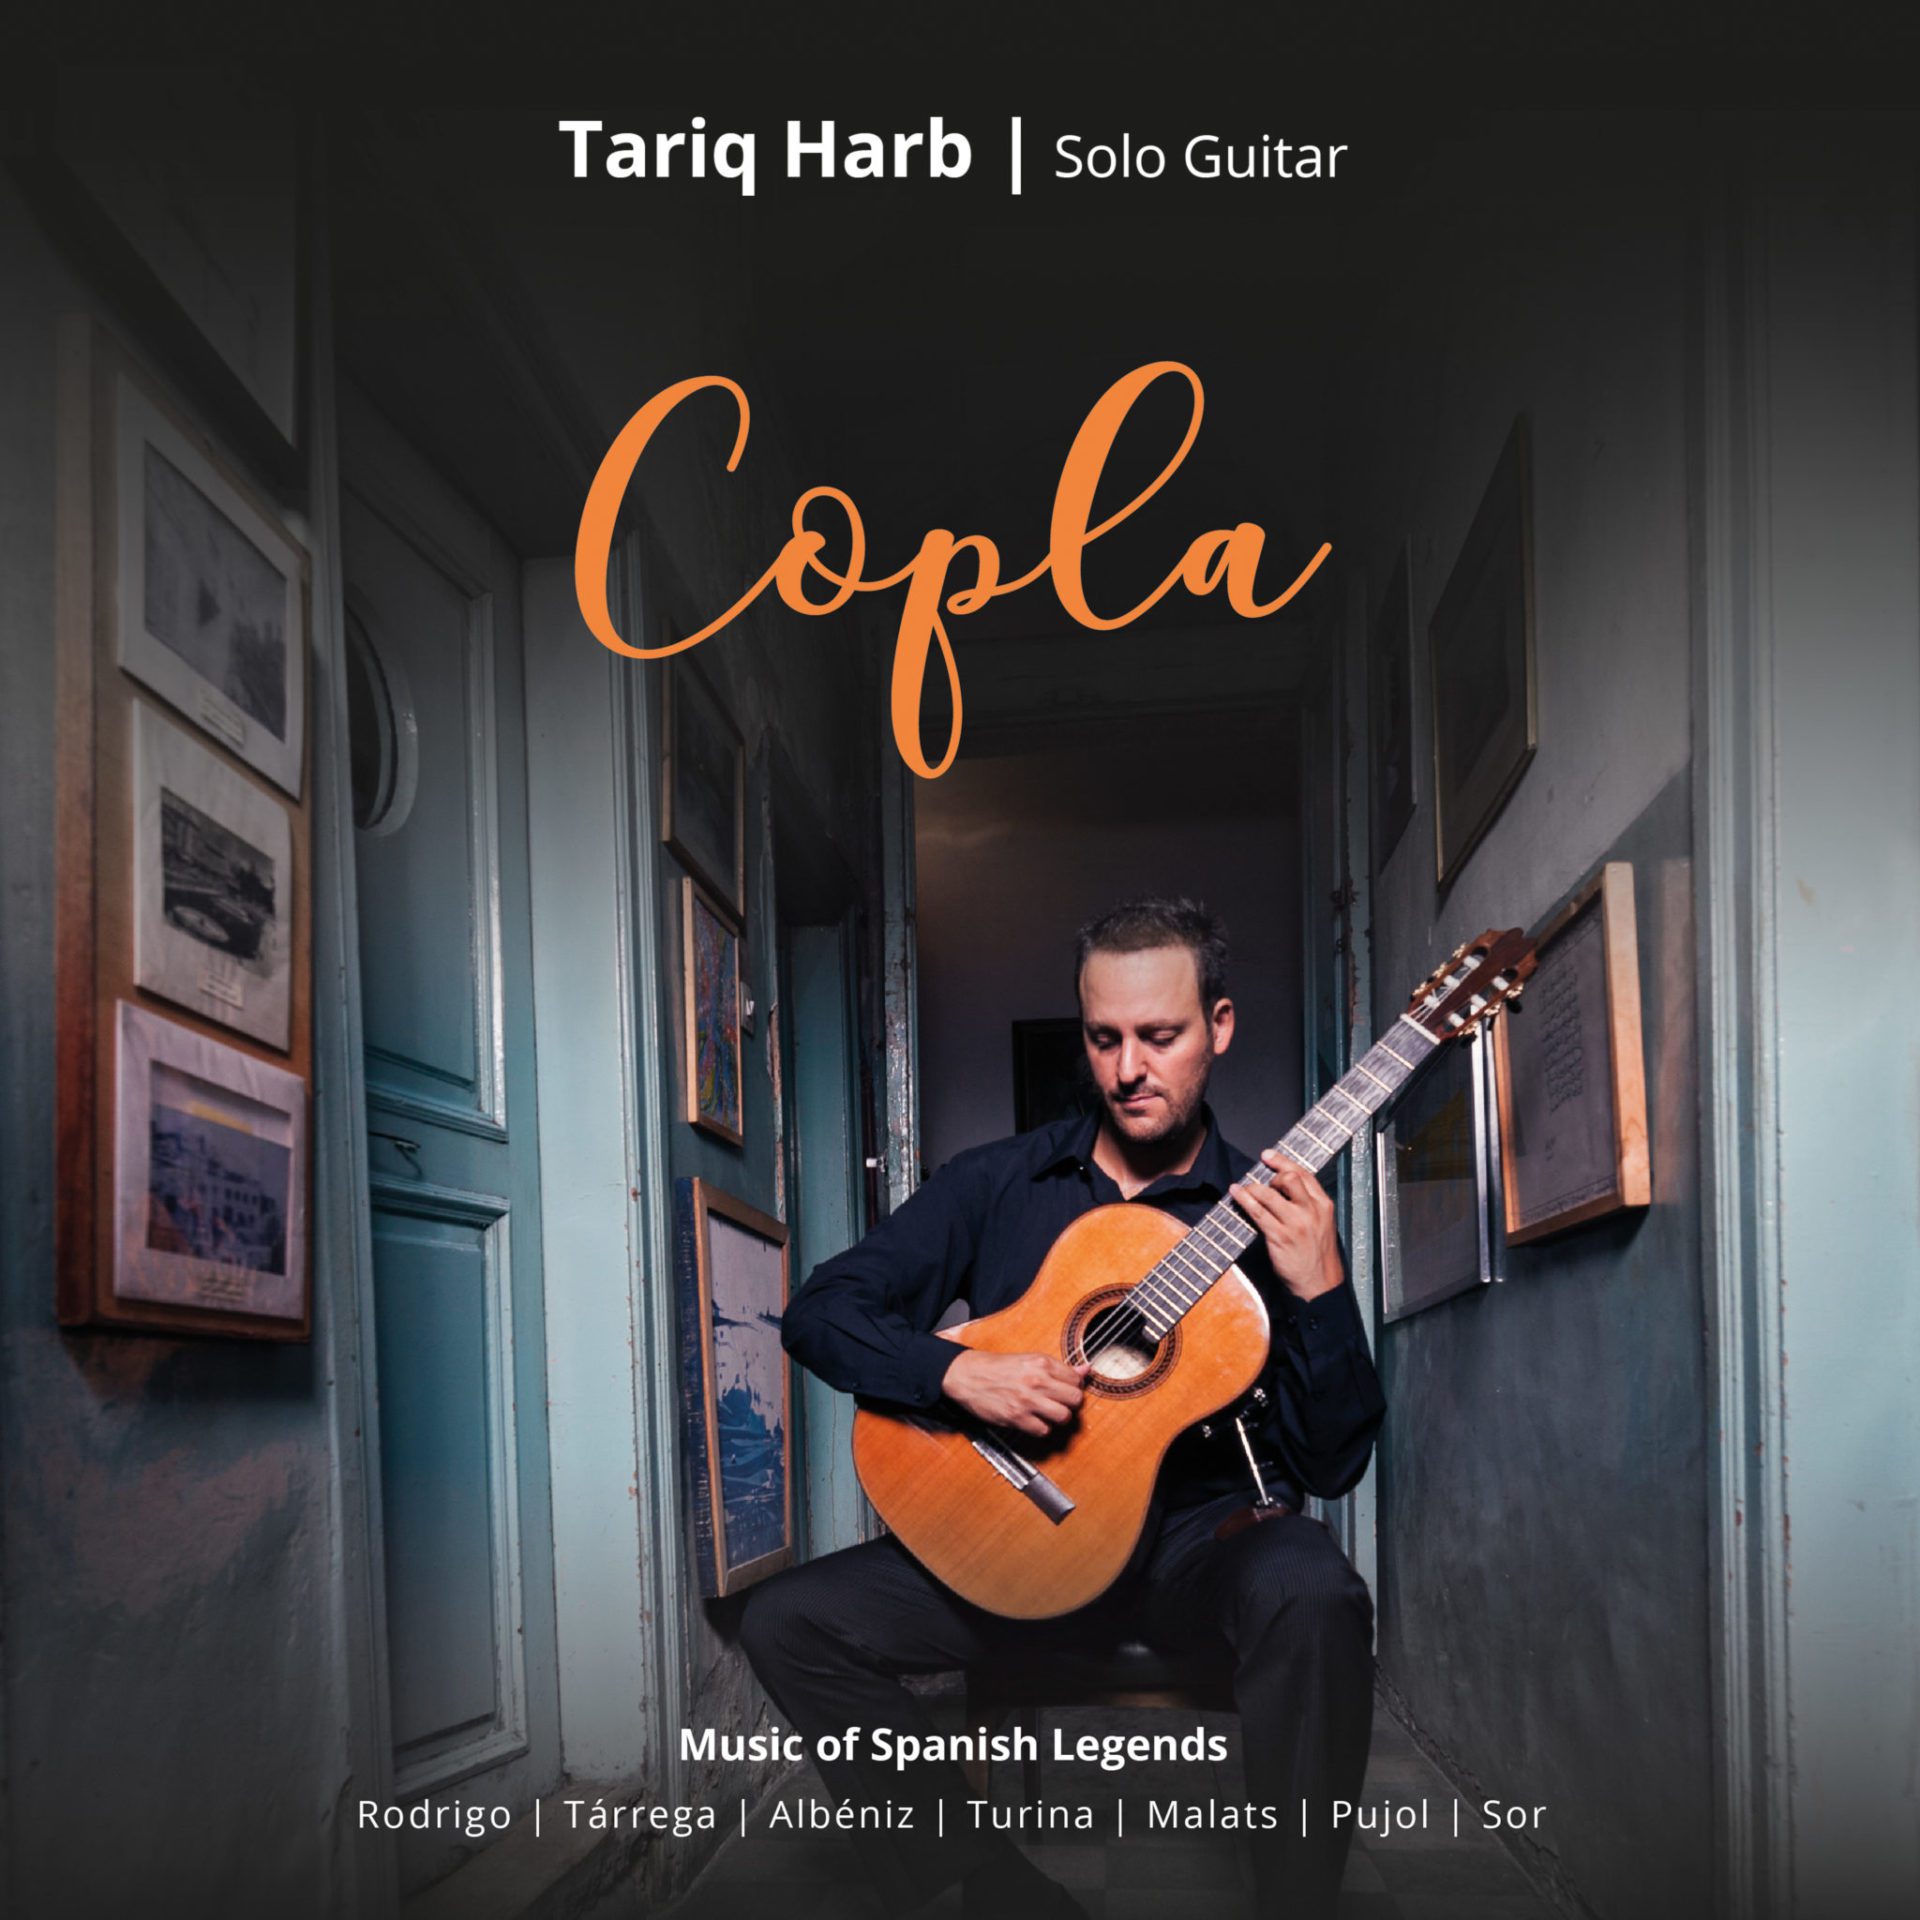 COPLA – a new CD by Tariq Harb is now available!